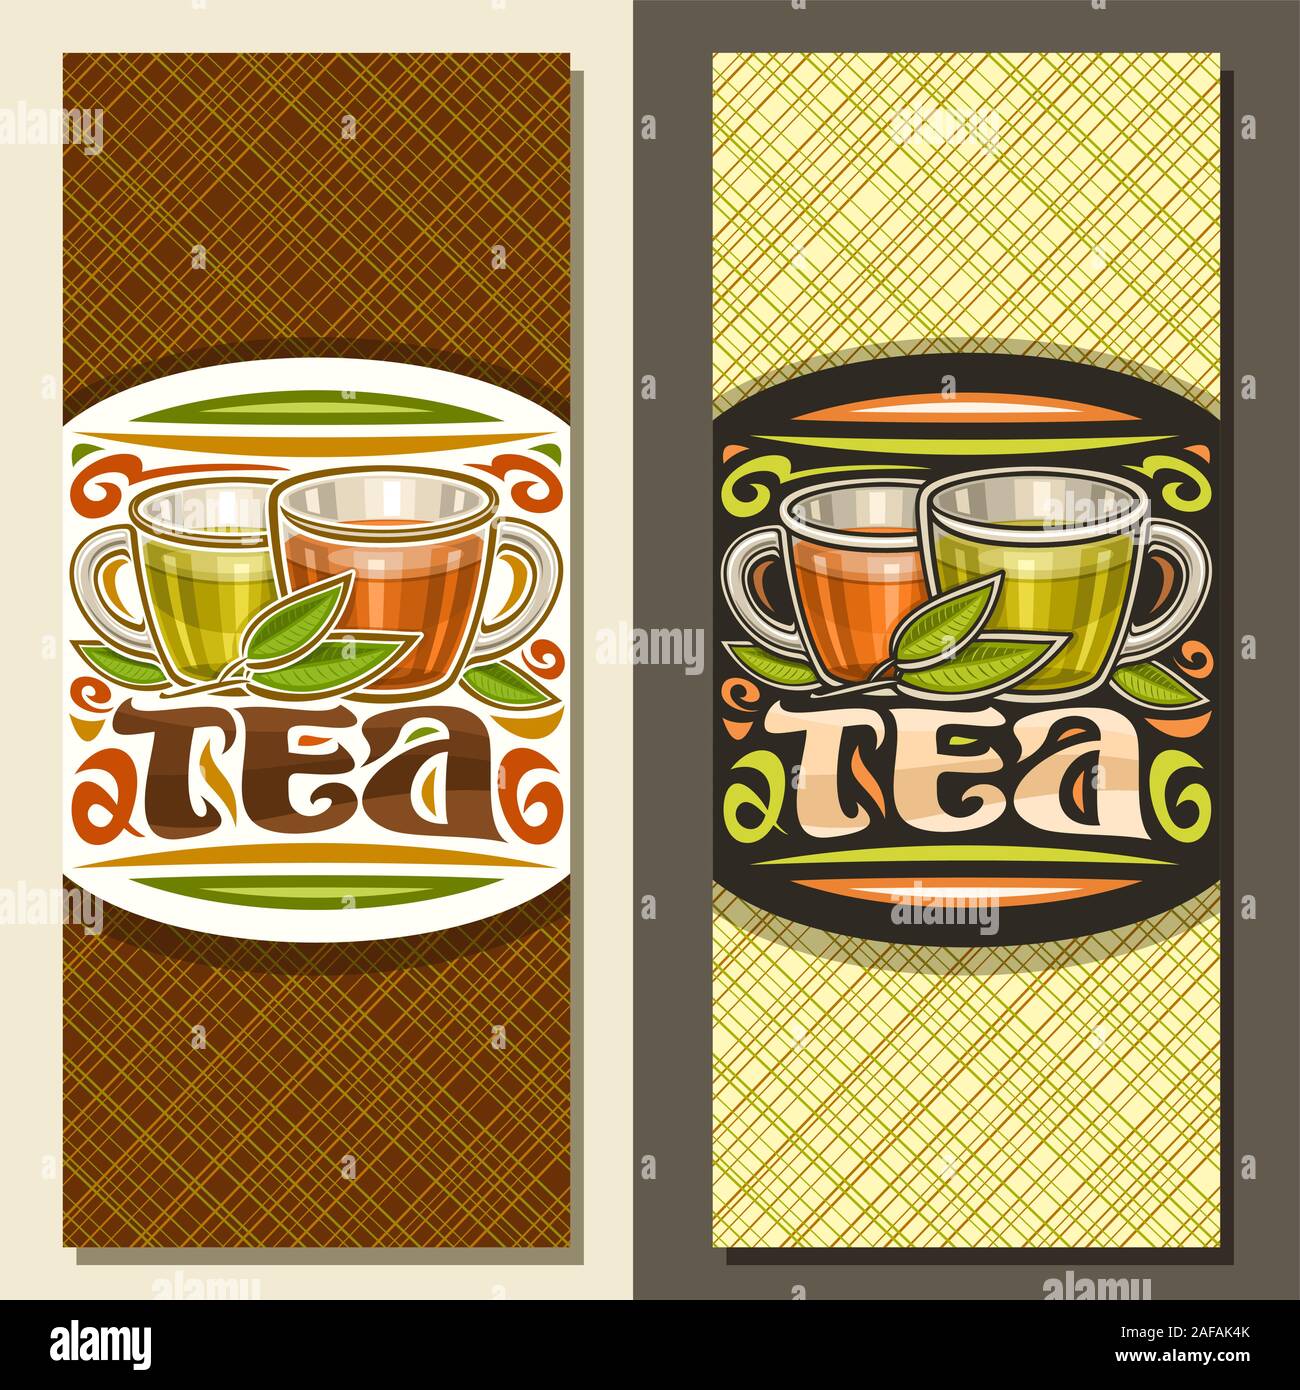 Vector layouts for Tea, brochure with illustration of 2 glass cups with yellow and brown liquid, fresh sprig of tea and flourishes, design signage wit Stock Vector